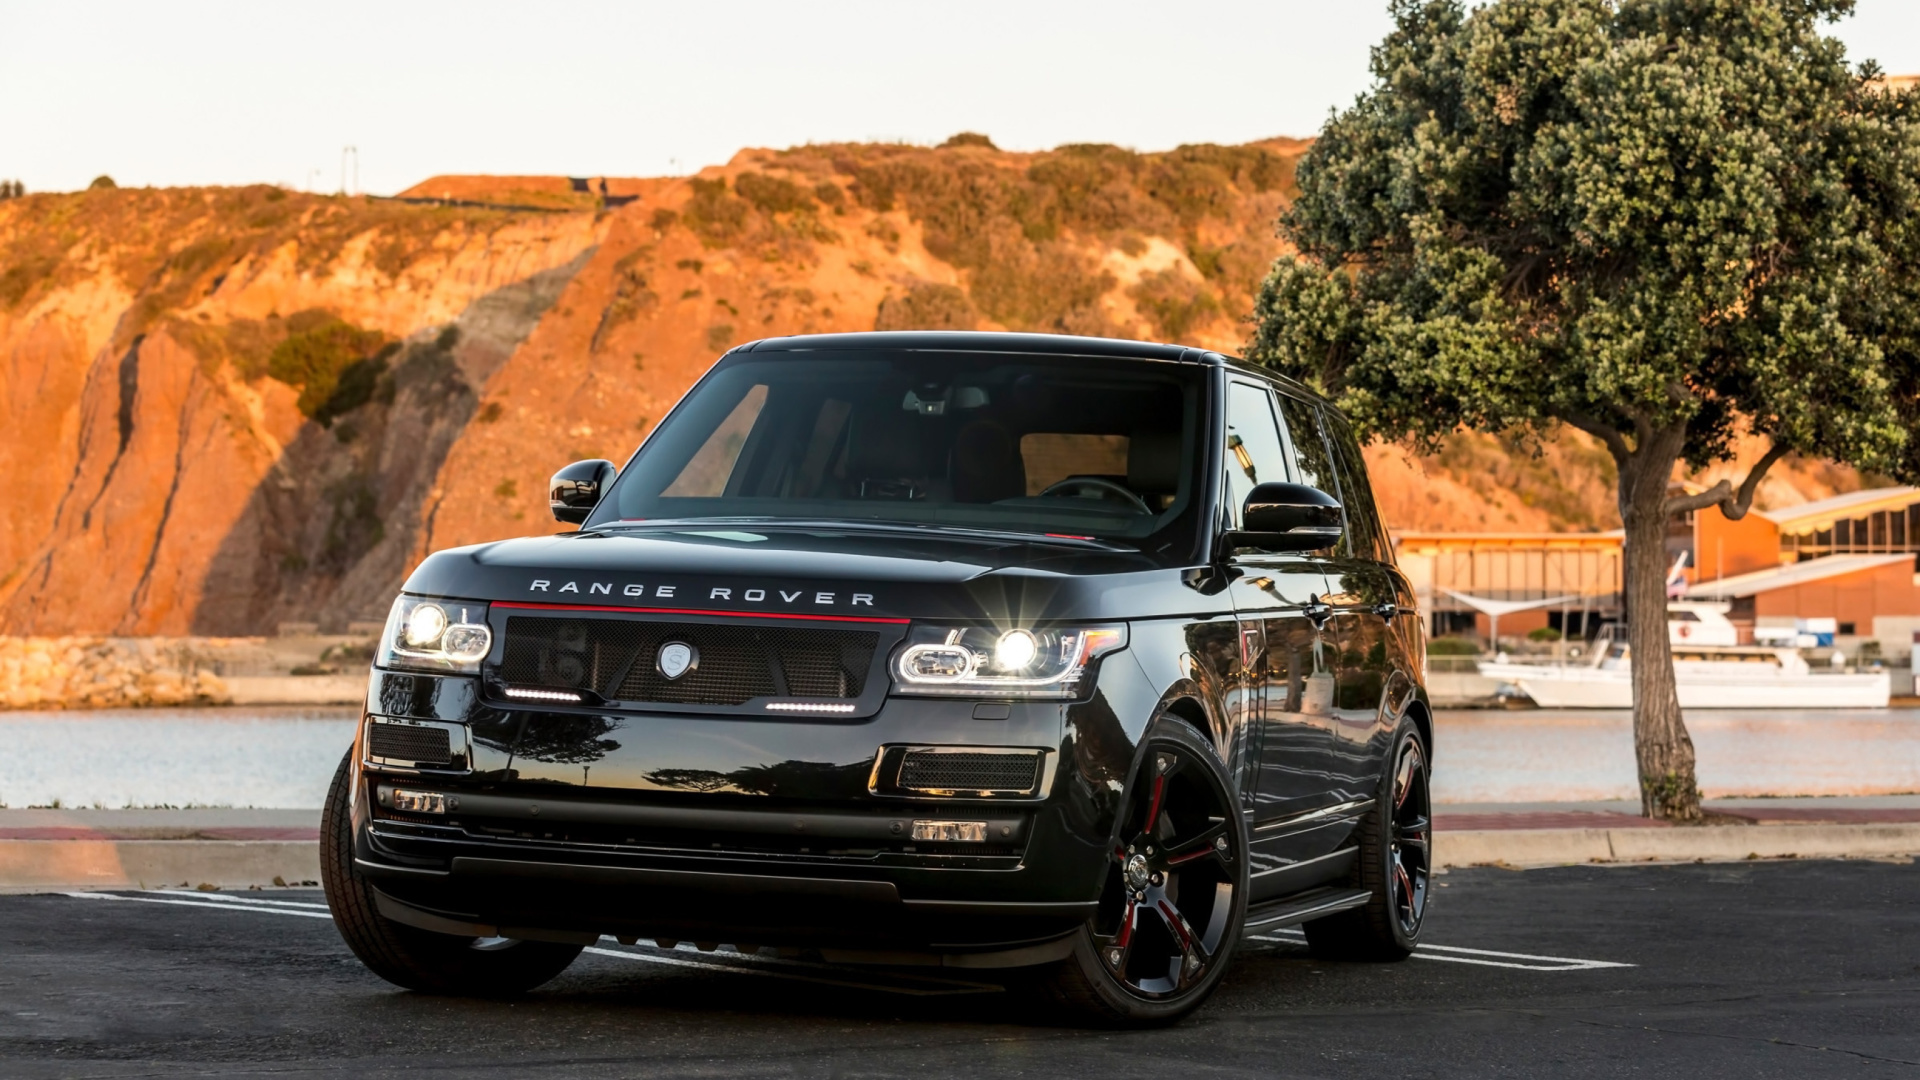 Range Rover STRUT with Grille Package wallpaper 1920x1080